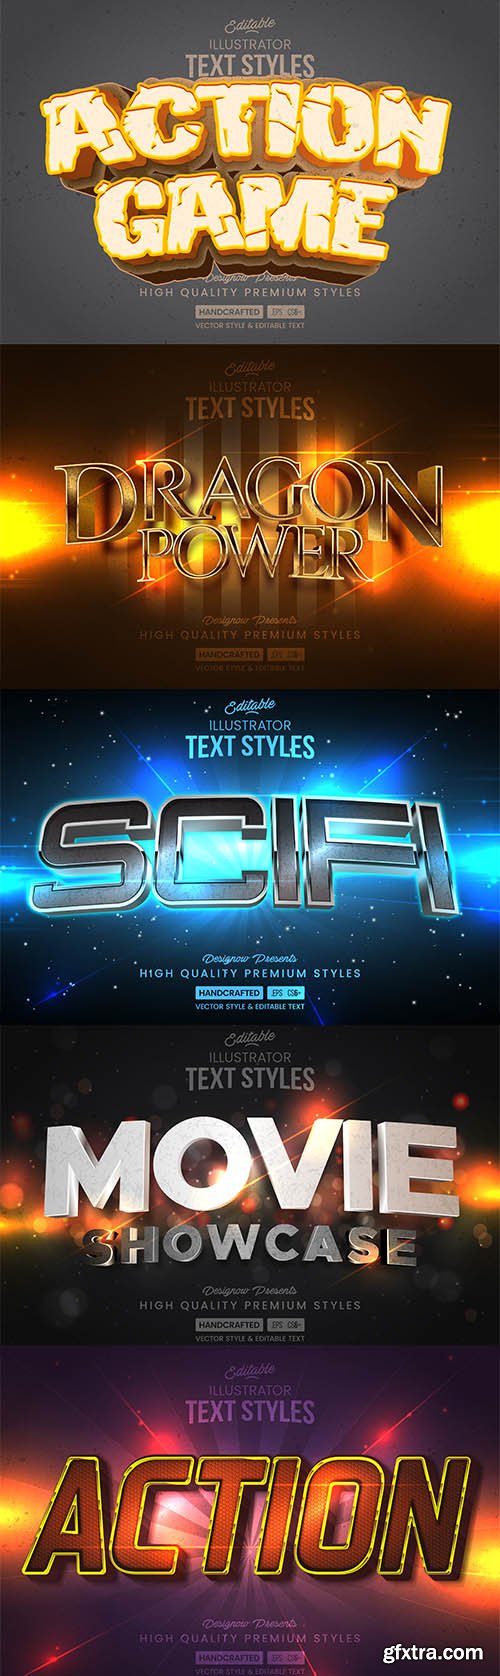 Super text style Pack